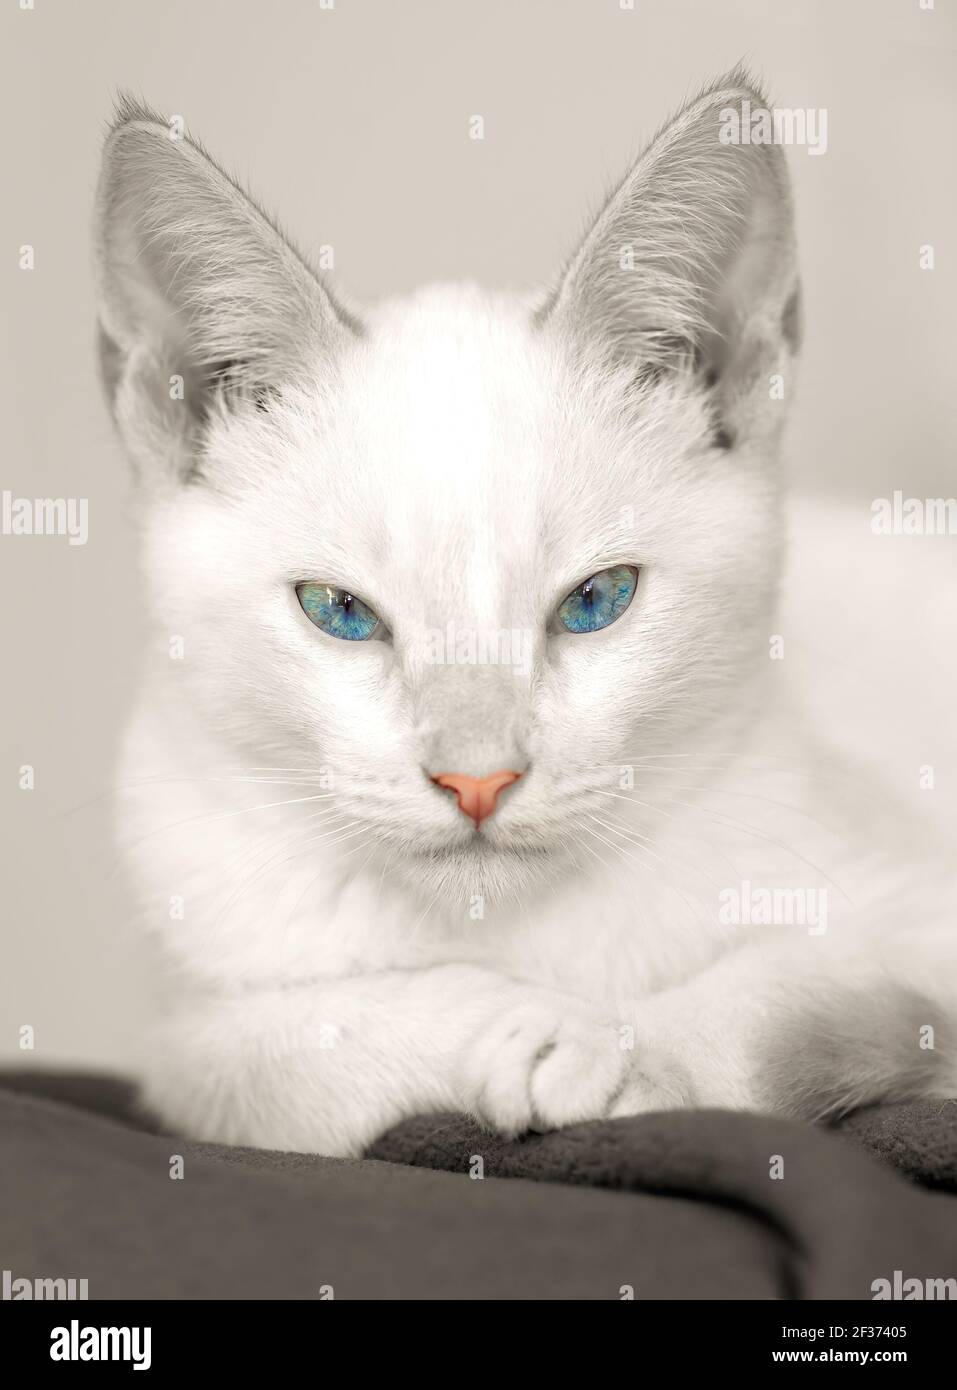 A White kitten is Staring With a Serious Look on Its Face in A Vertical Format Stock Photo